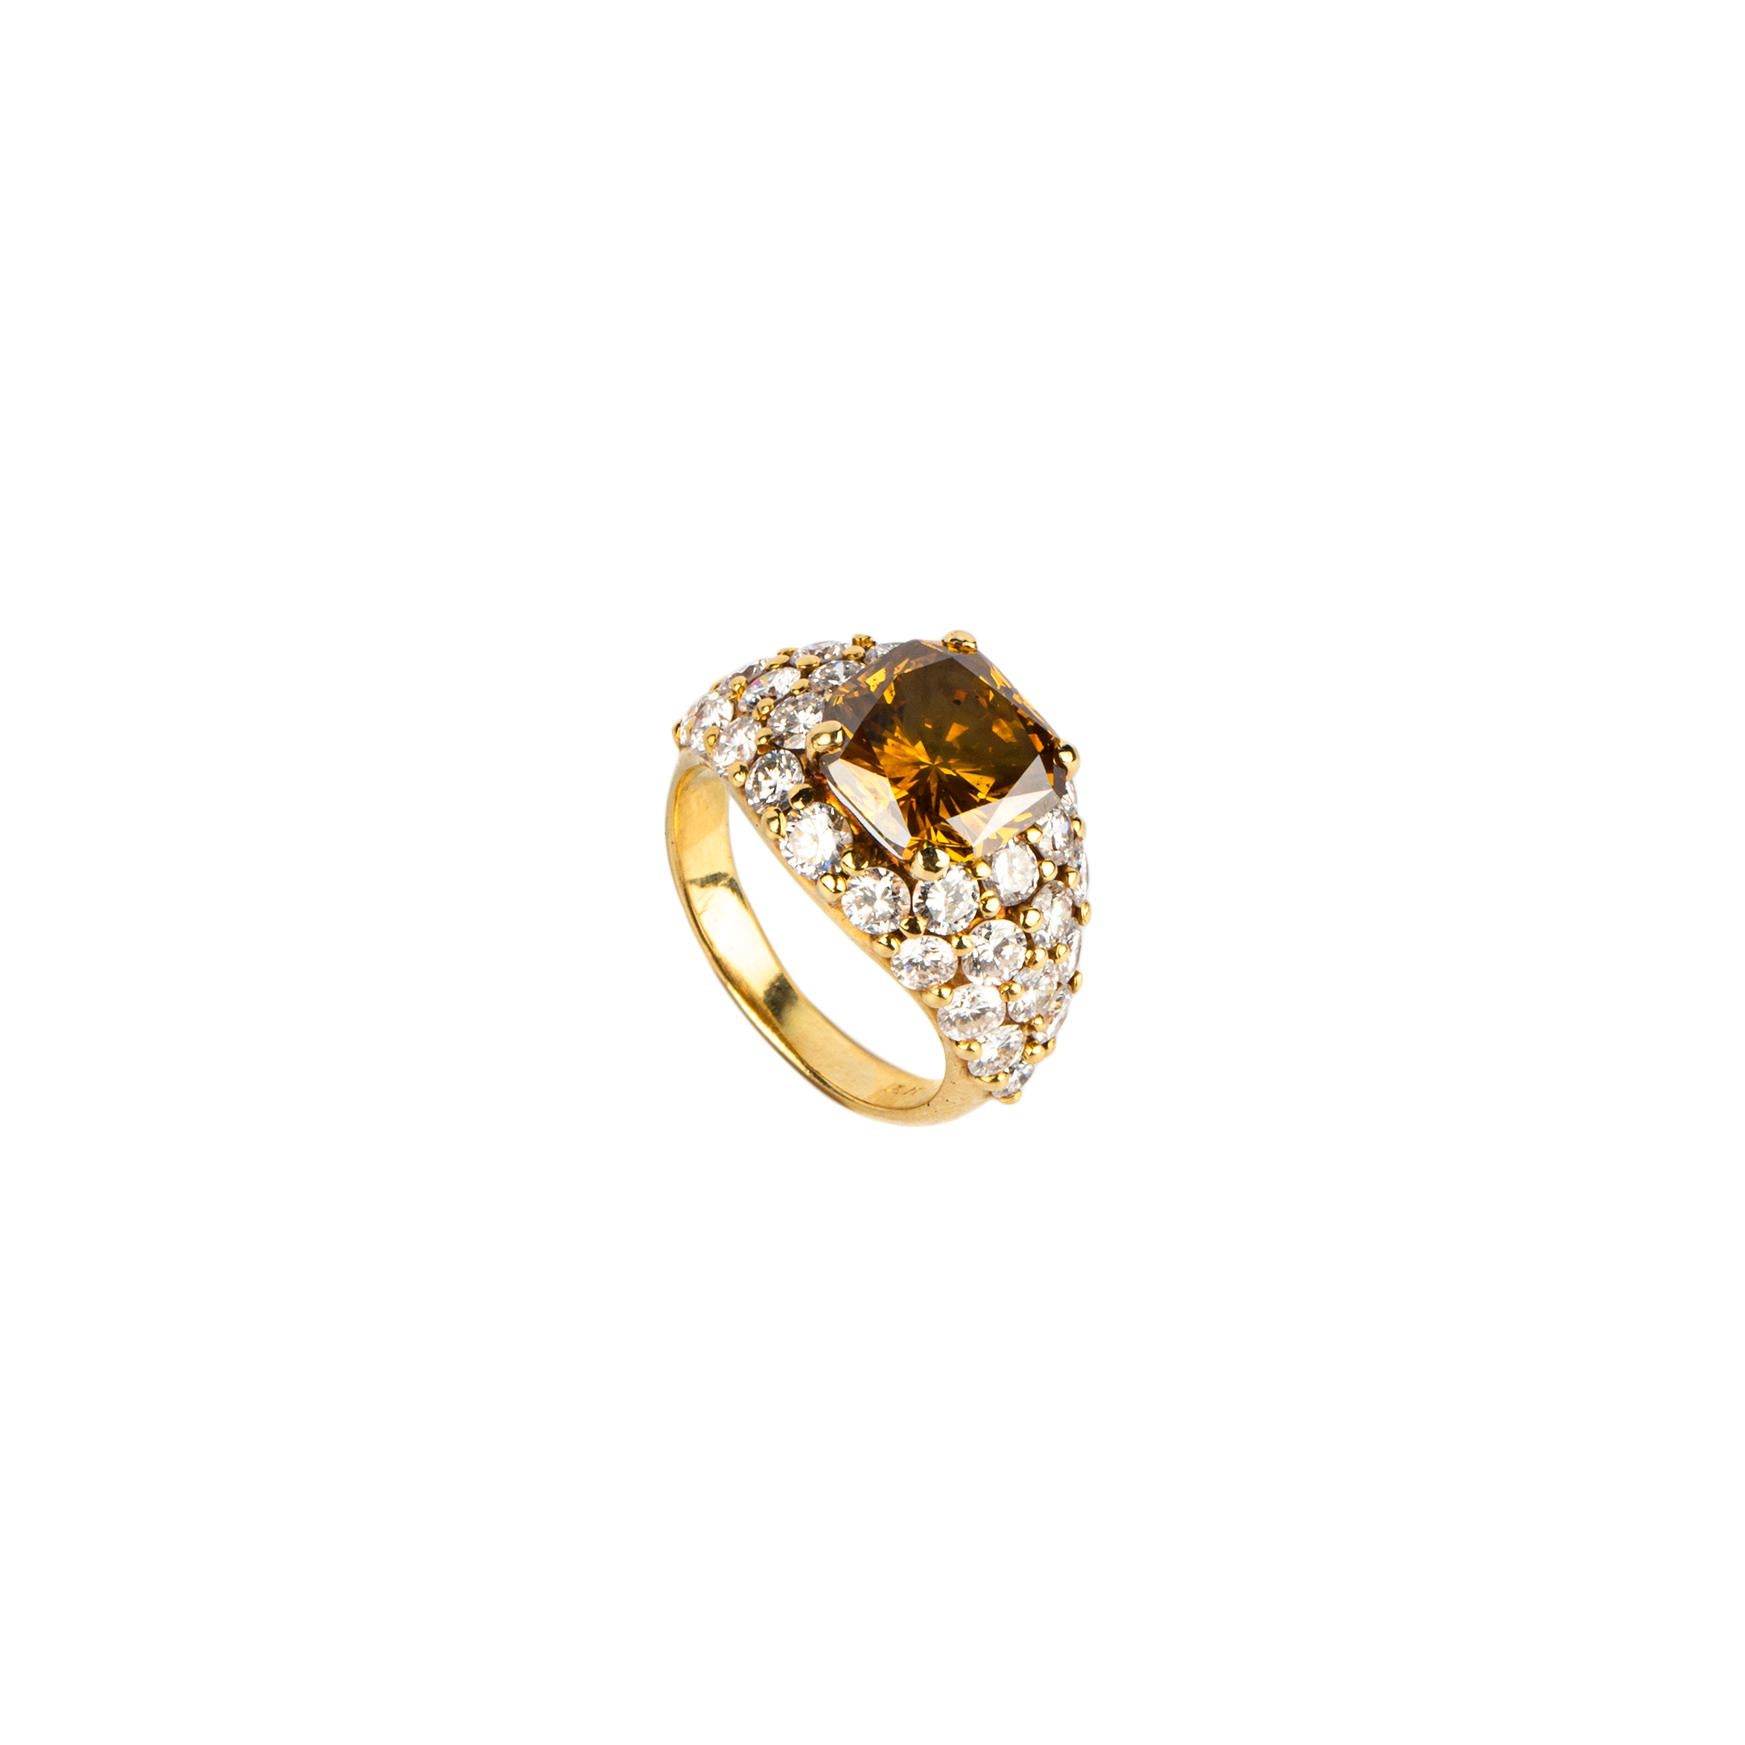 Van Cleef & Arpels 18k yellow gold ring centring a 3.8 carat fancy intense brown yellow diamond, highlighted by diamond pave on the shoulders.